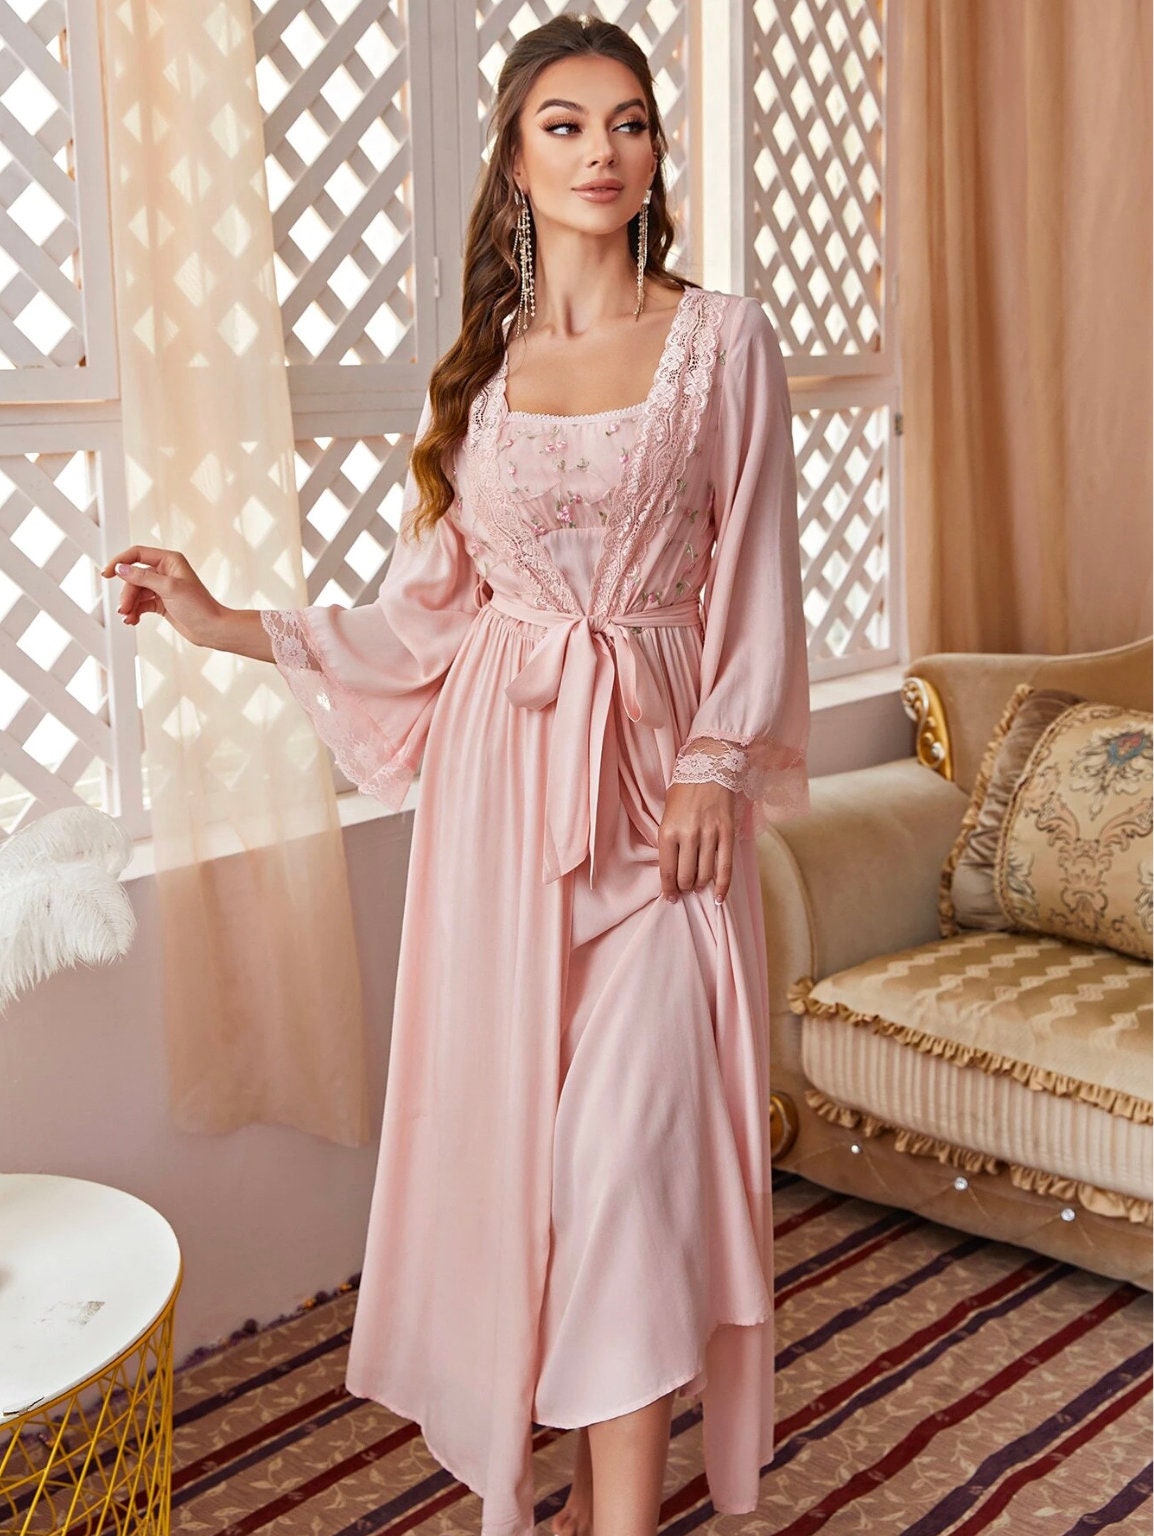 Amazoncom CZDYUF Satin 2 Pieces Robe Set Lace Sleepwear Sexy Strap Nightgown  Long Womens Nightwear Casual Home Suit Woman Color  A Size  XL code   Clothing Shoes  Jewelry